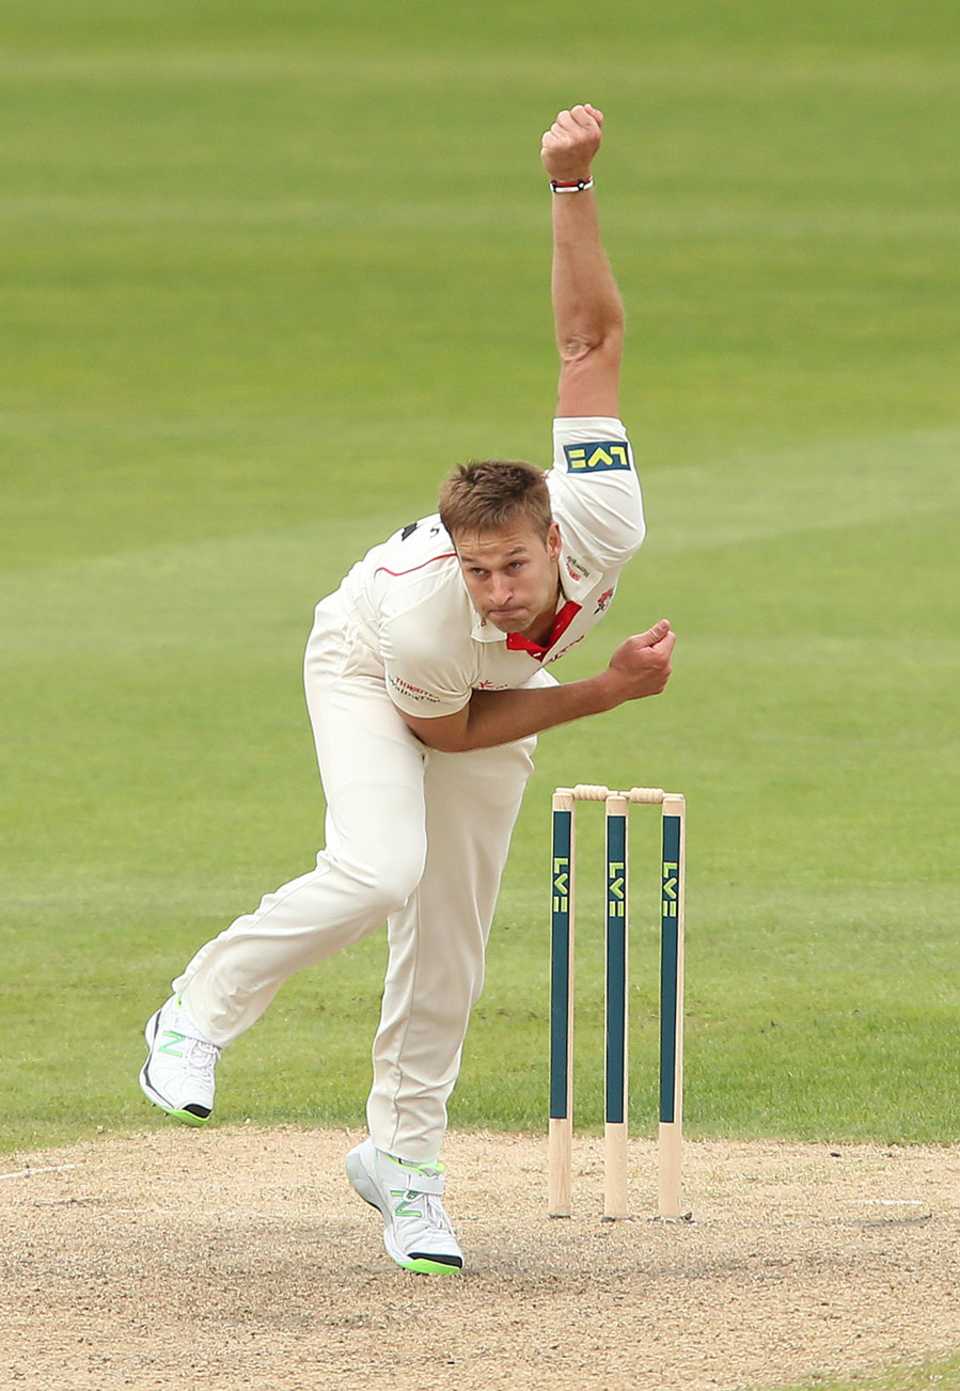 Kyle Jarvis picked up two cheap wickets